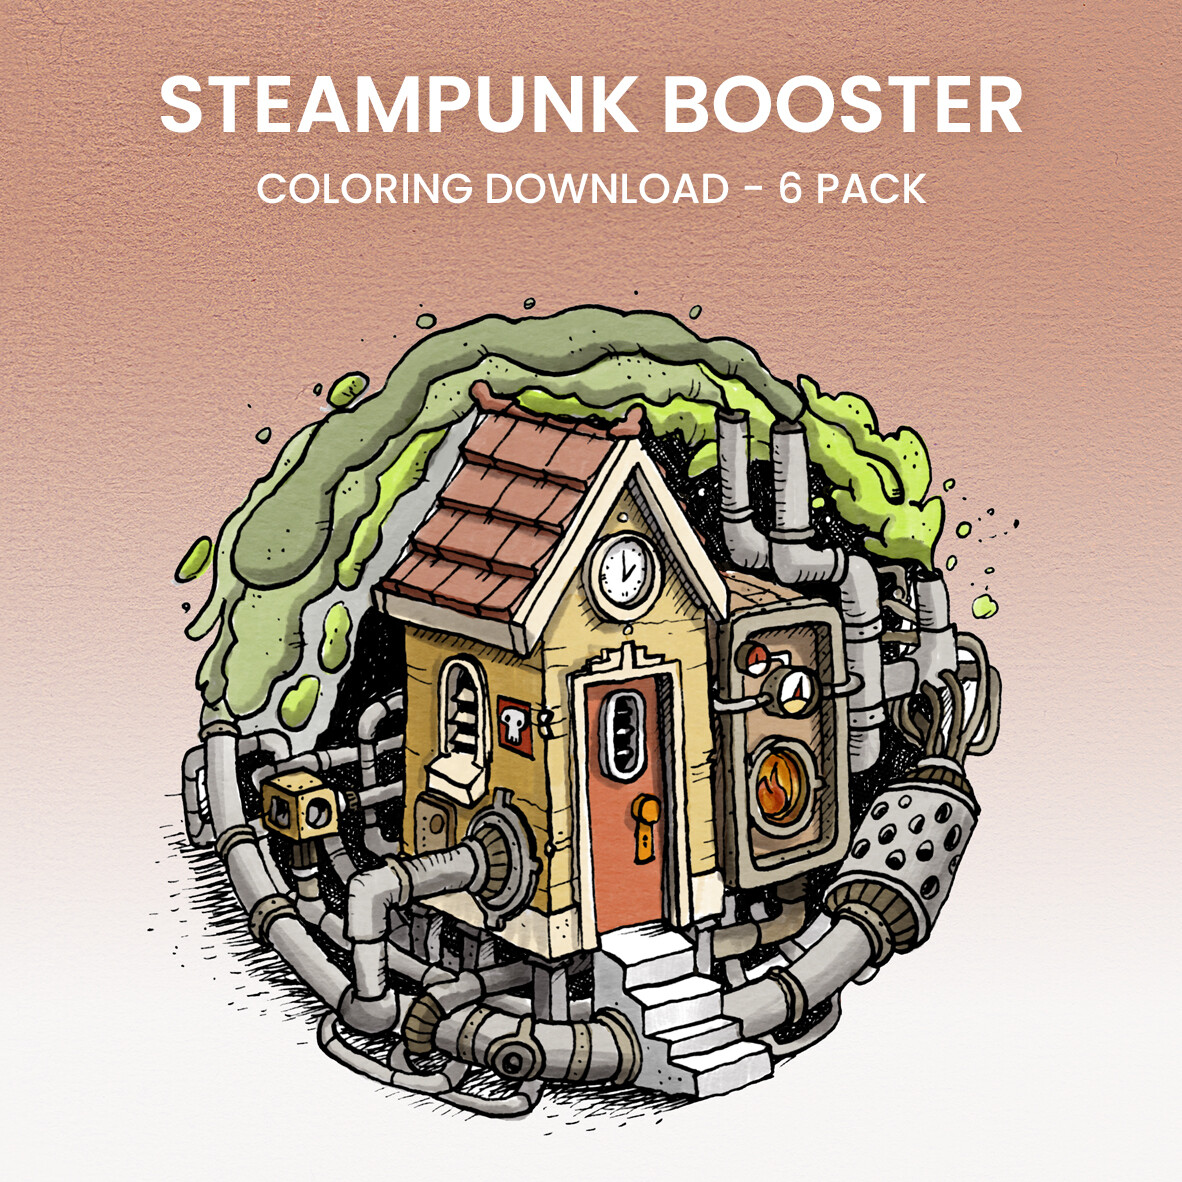 Steampunk Booster Coloring 6 Pack